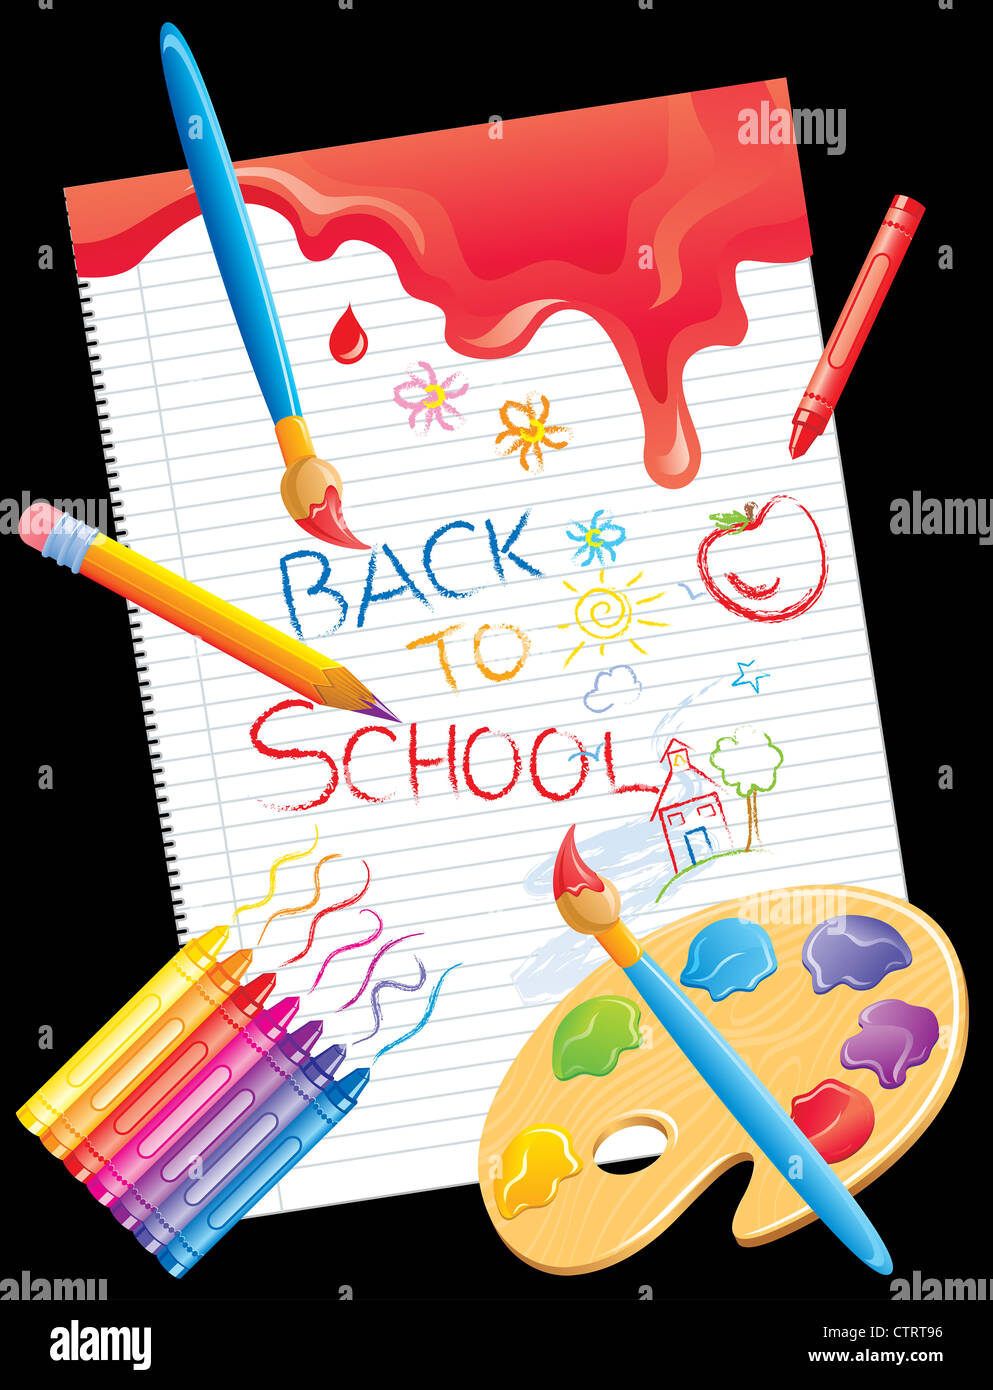 Frame with back to school on A black background. Stock Photo